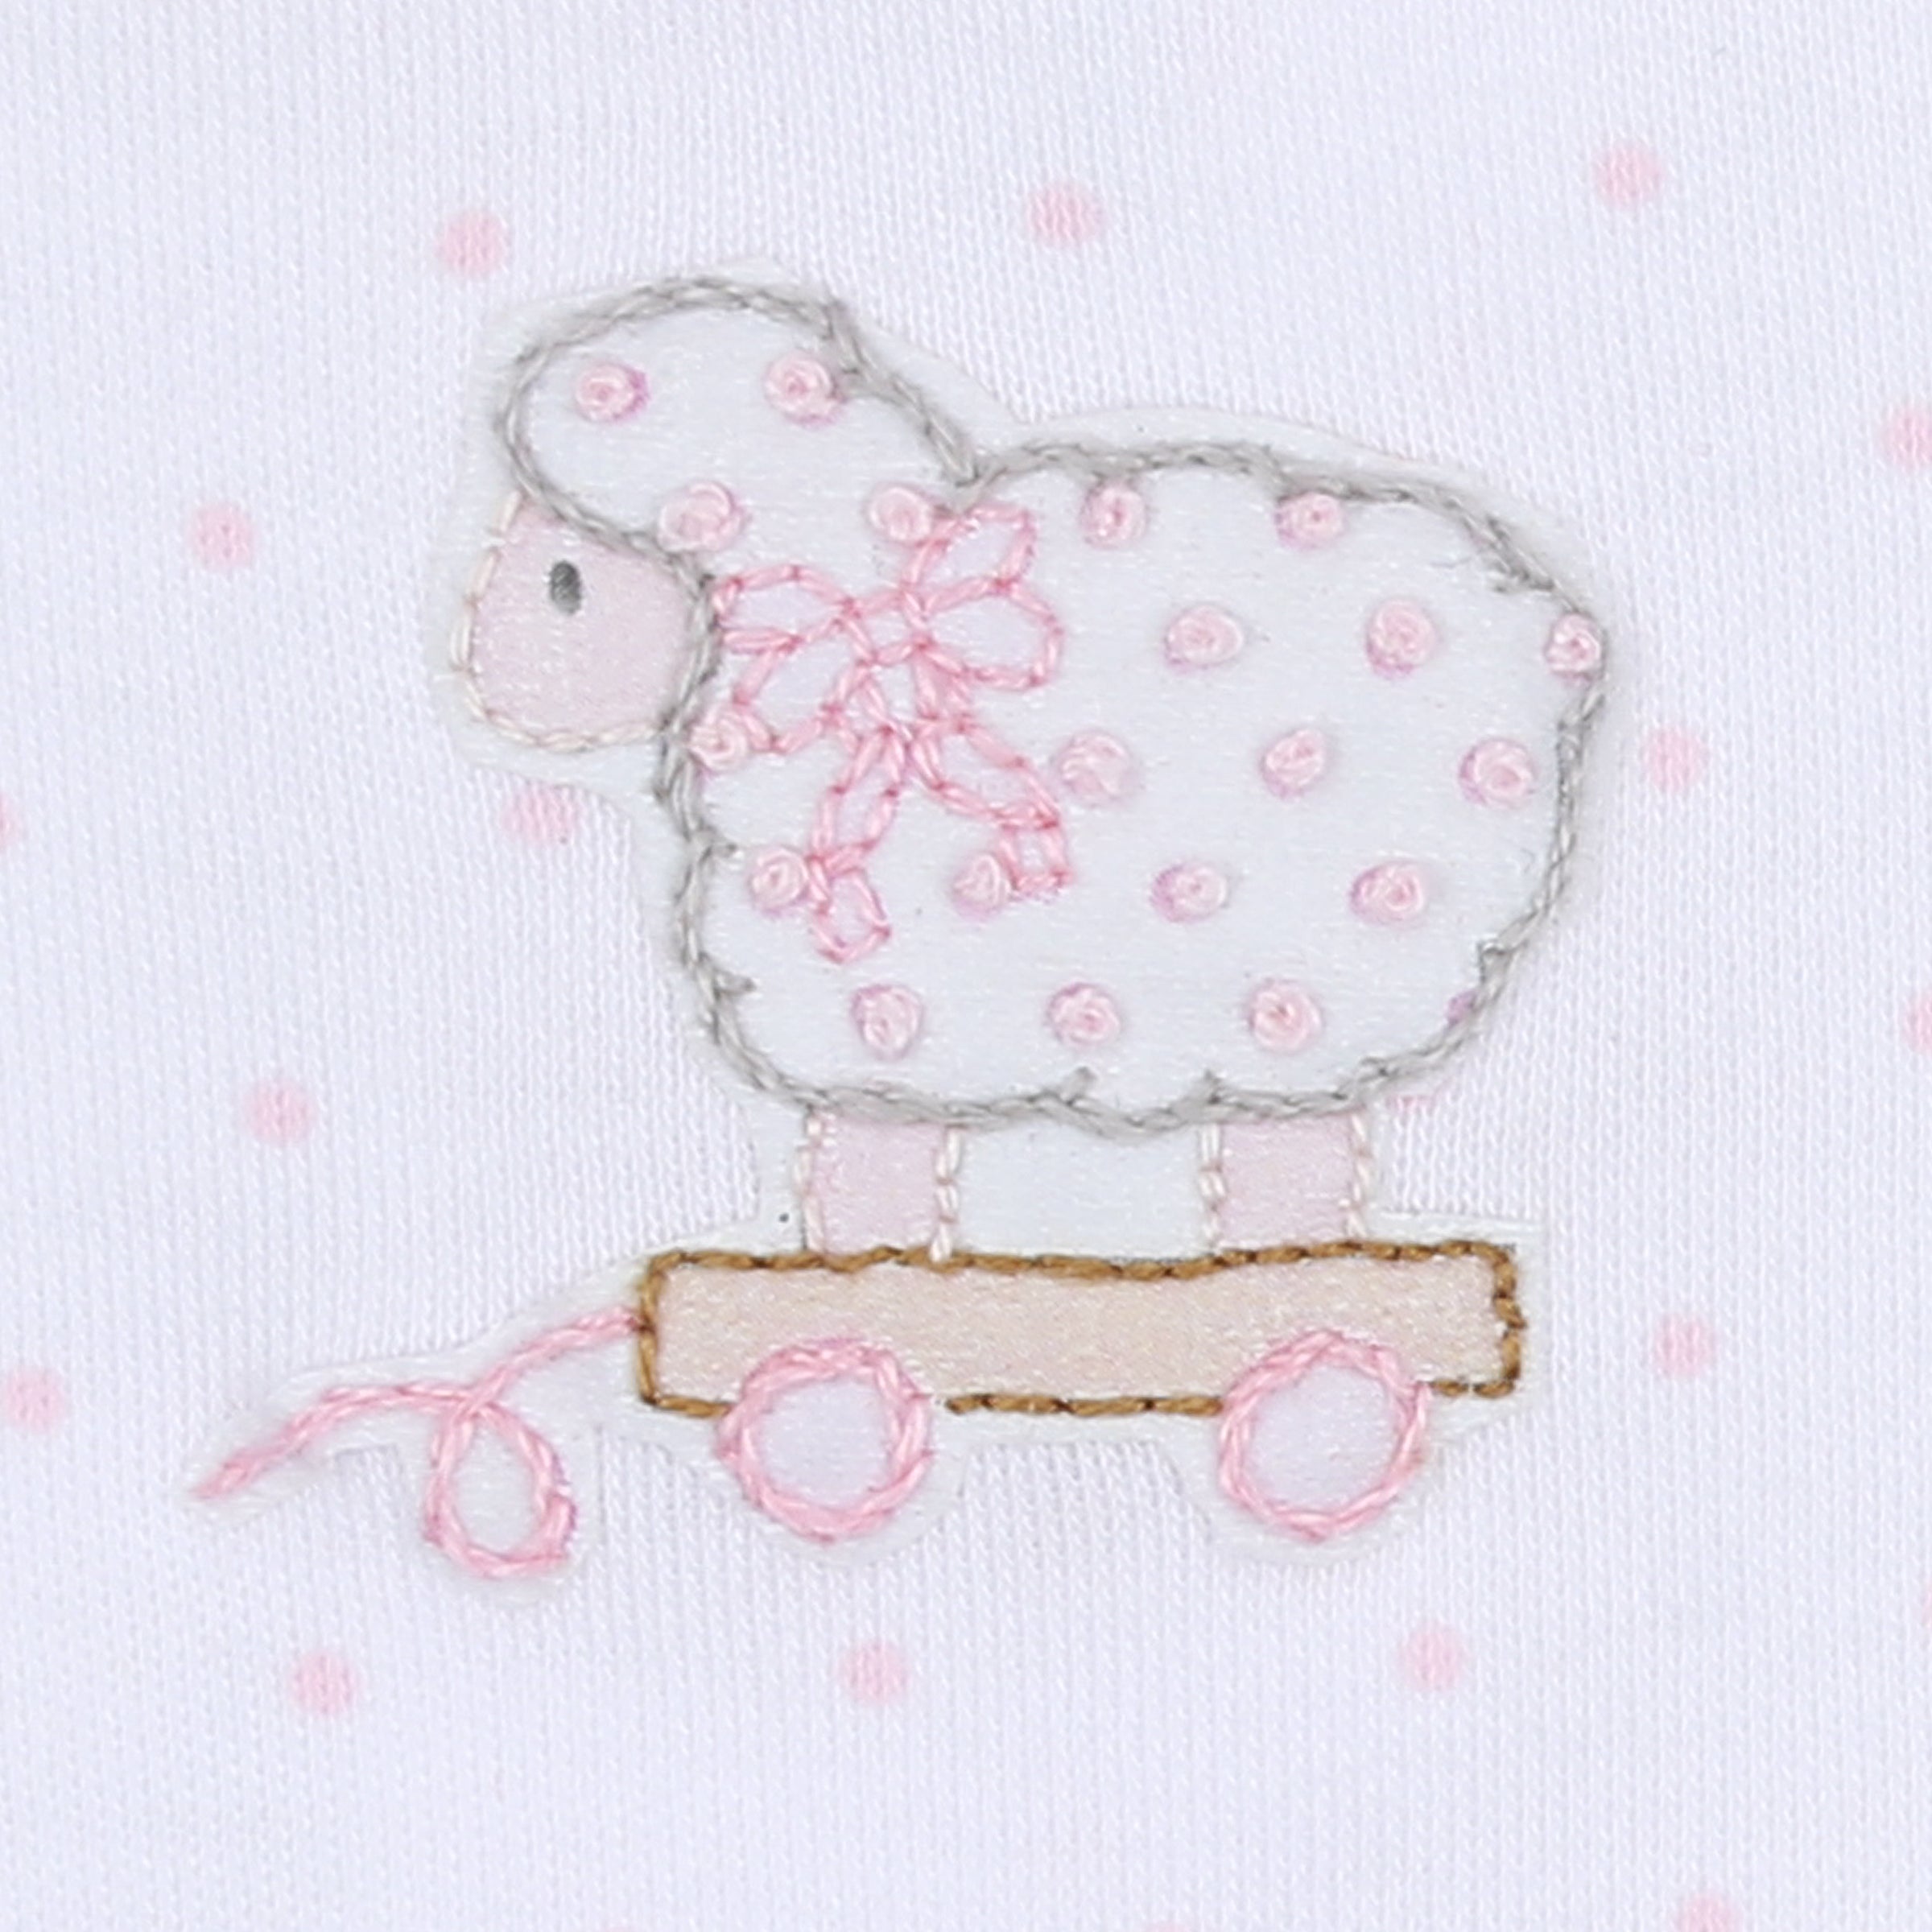 Darling Lambs Embroidered Socks - Pink